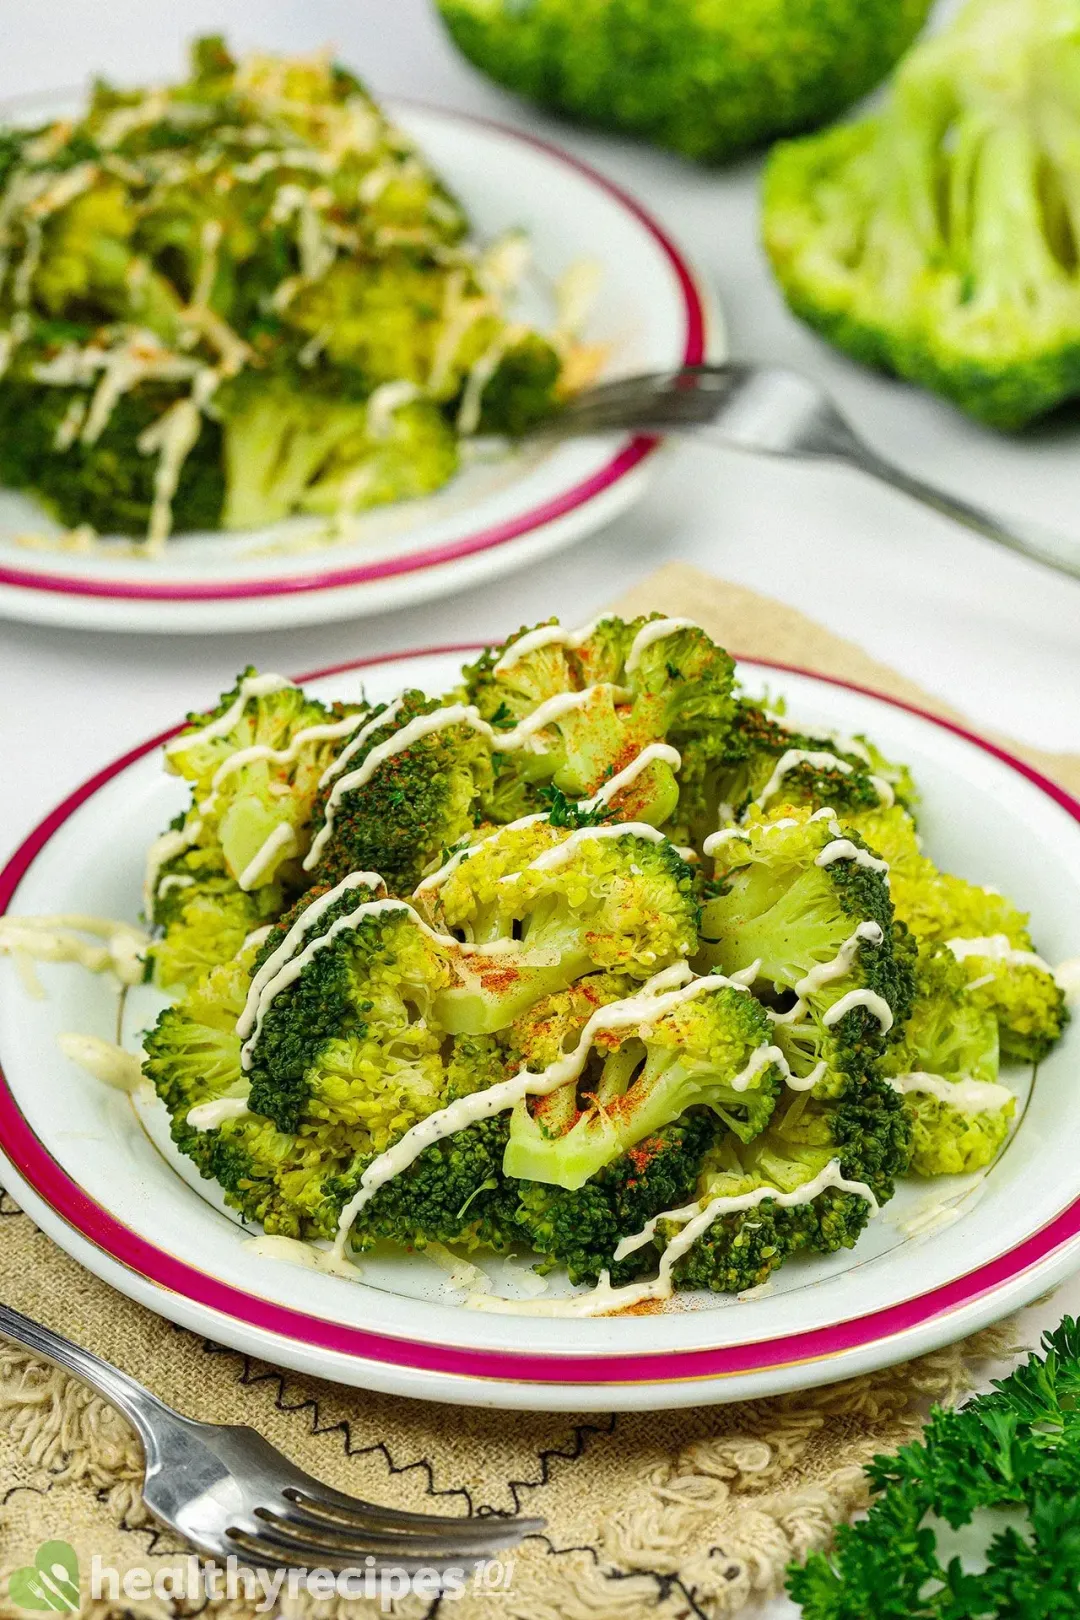 How to Steam Broccoli Without a steamer